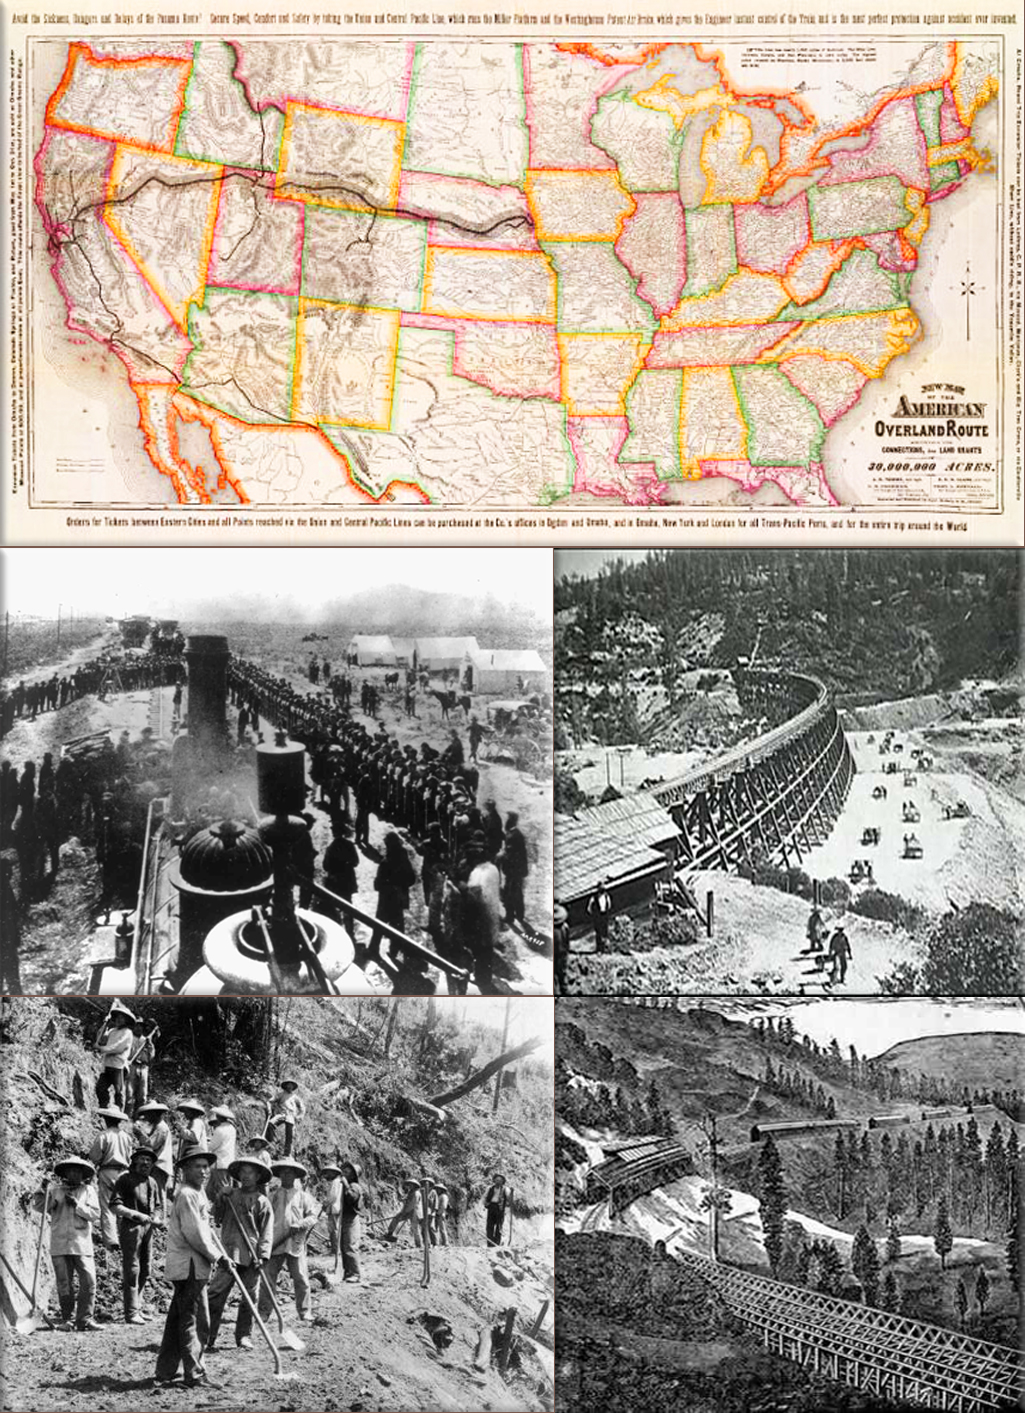 The First Transcontinental Railroad (known originally as the 'Pacific Railroad' and later as the 'Overland Route') was a railroad line built in the United States of America between 1863 and 1869 by the Central Pacific Railroad of California and the Union Pacific Railroad that connected its statutory Eastern terminus at Council Bluffs, Iowa/Omaha, Nebraska (via Ogden, Utah, and Sacramento, California) with the Pacific Ocean at Oakland, California on the eastern shore of San Francisco Bay opposite San Francisco